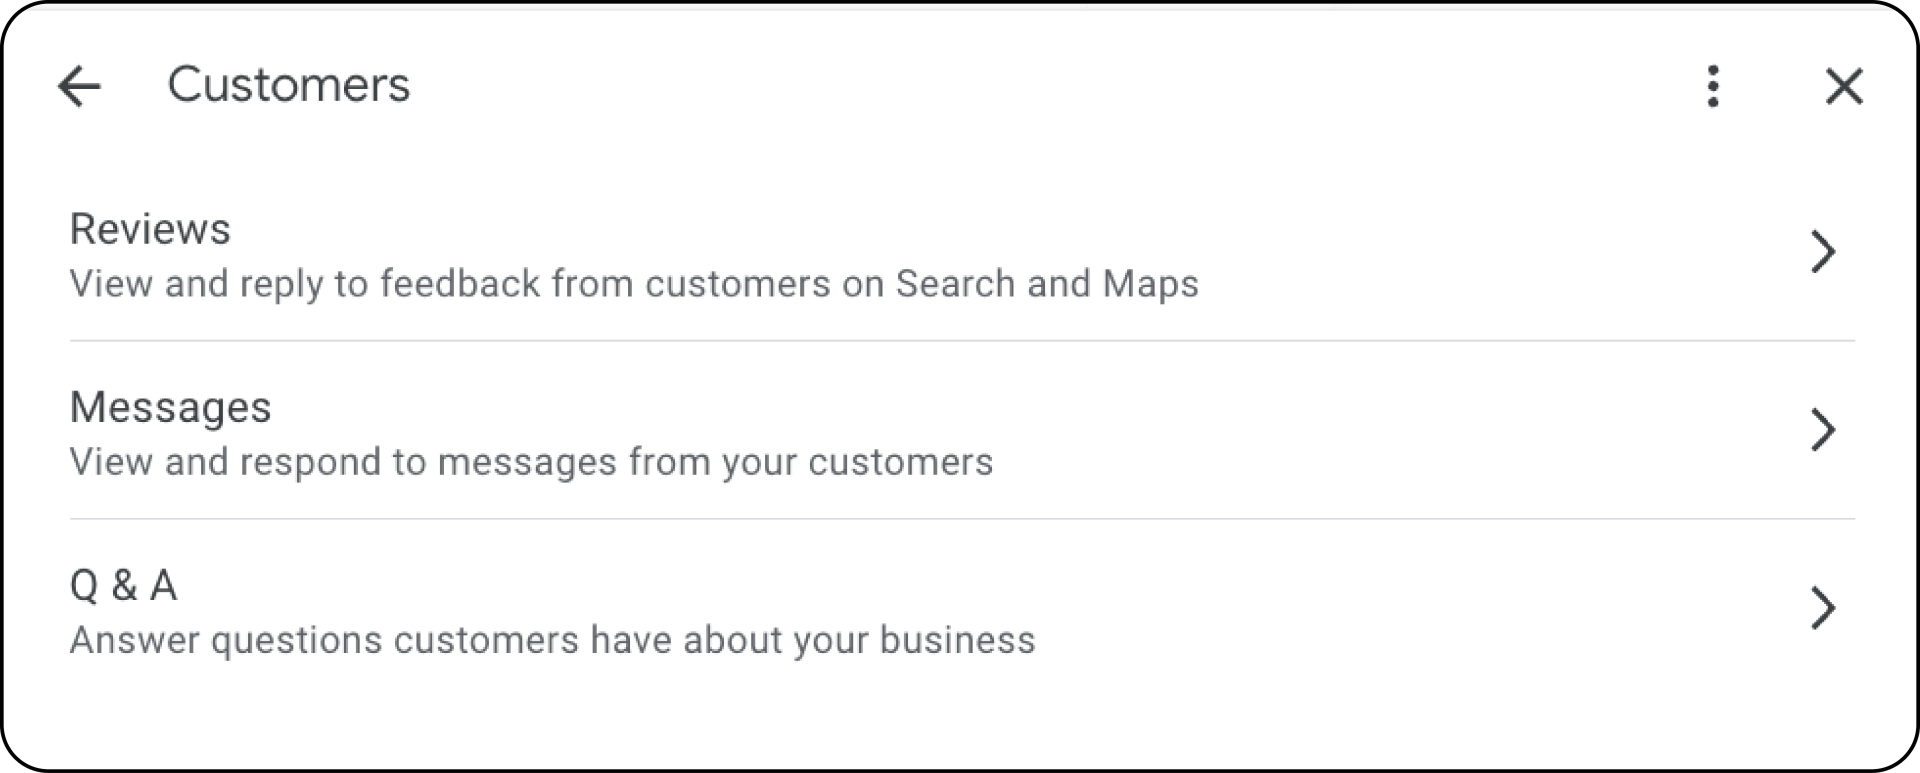 Google Business Profile: Customer Section Options